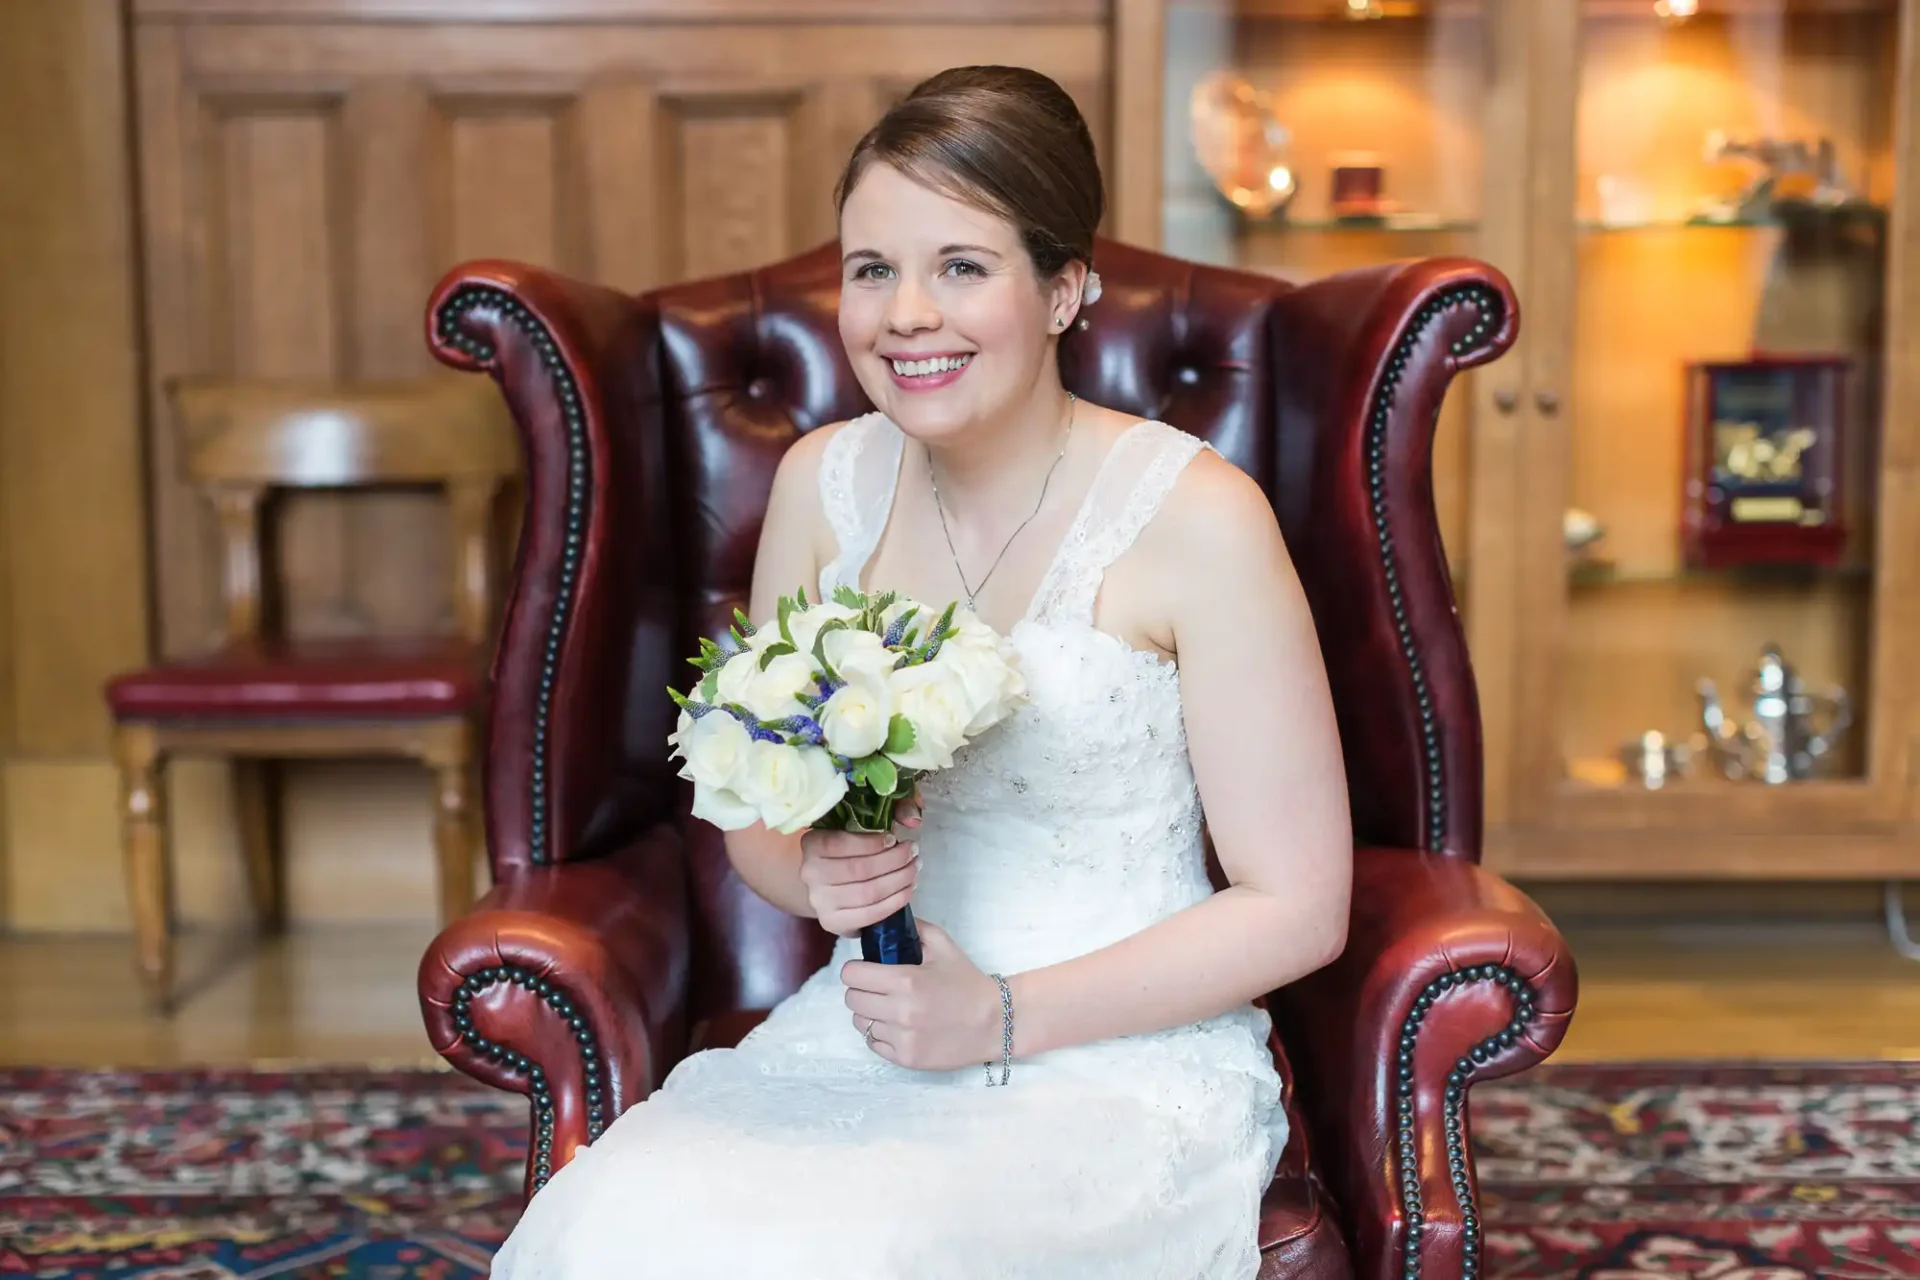 A bride in a white dress sits smiling on a red leather chair, holding a bouquet of white and pale yellow flowers, with a wood-paneled background.